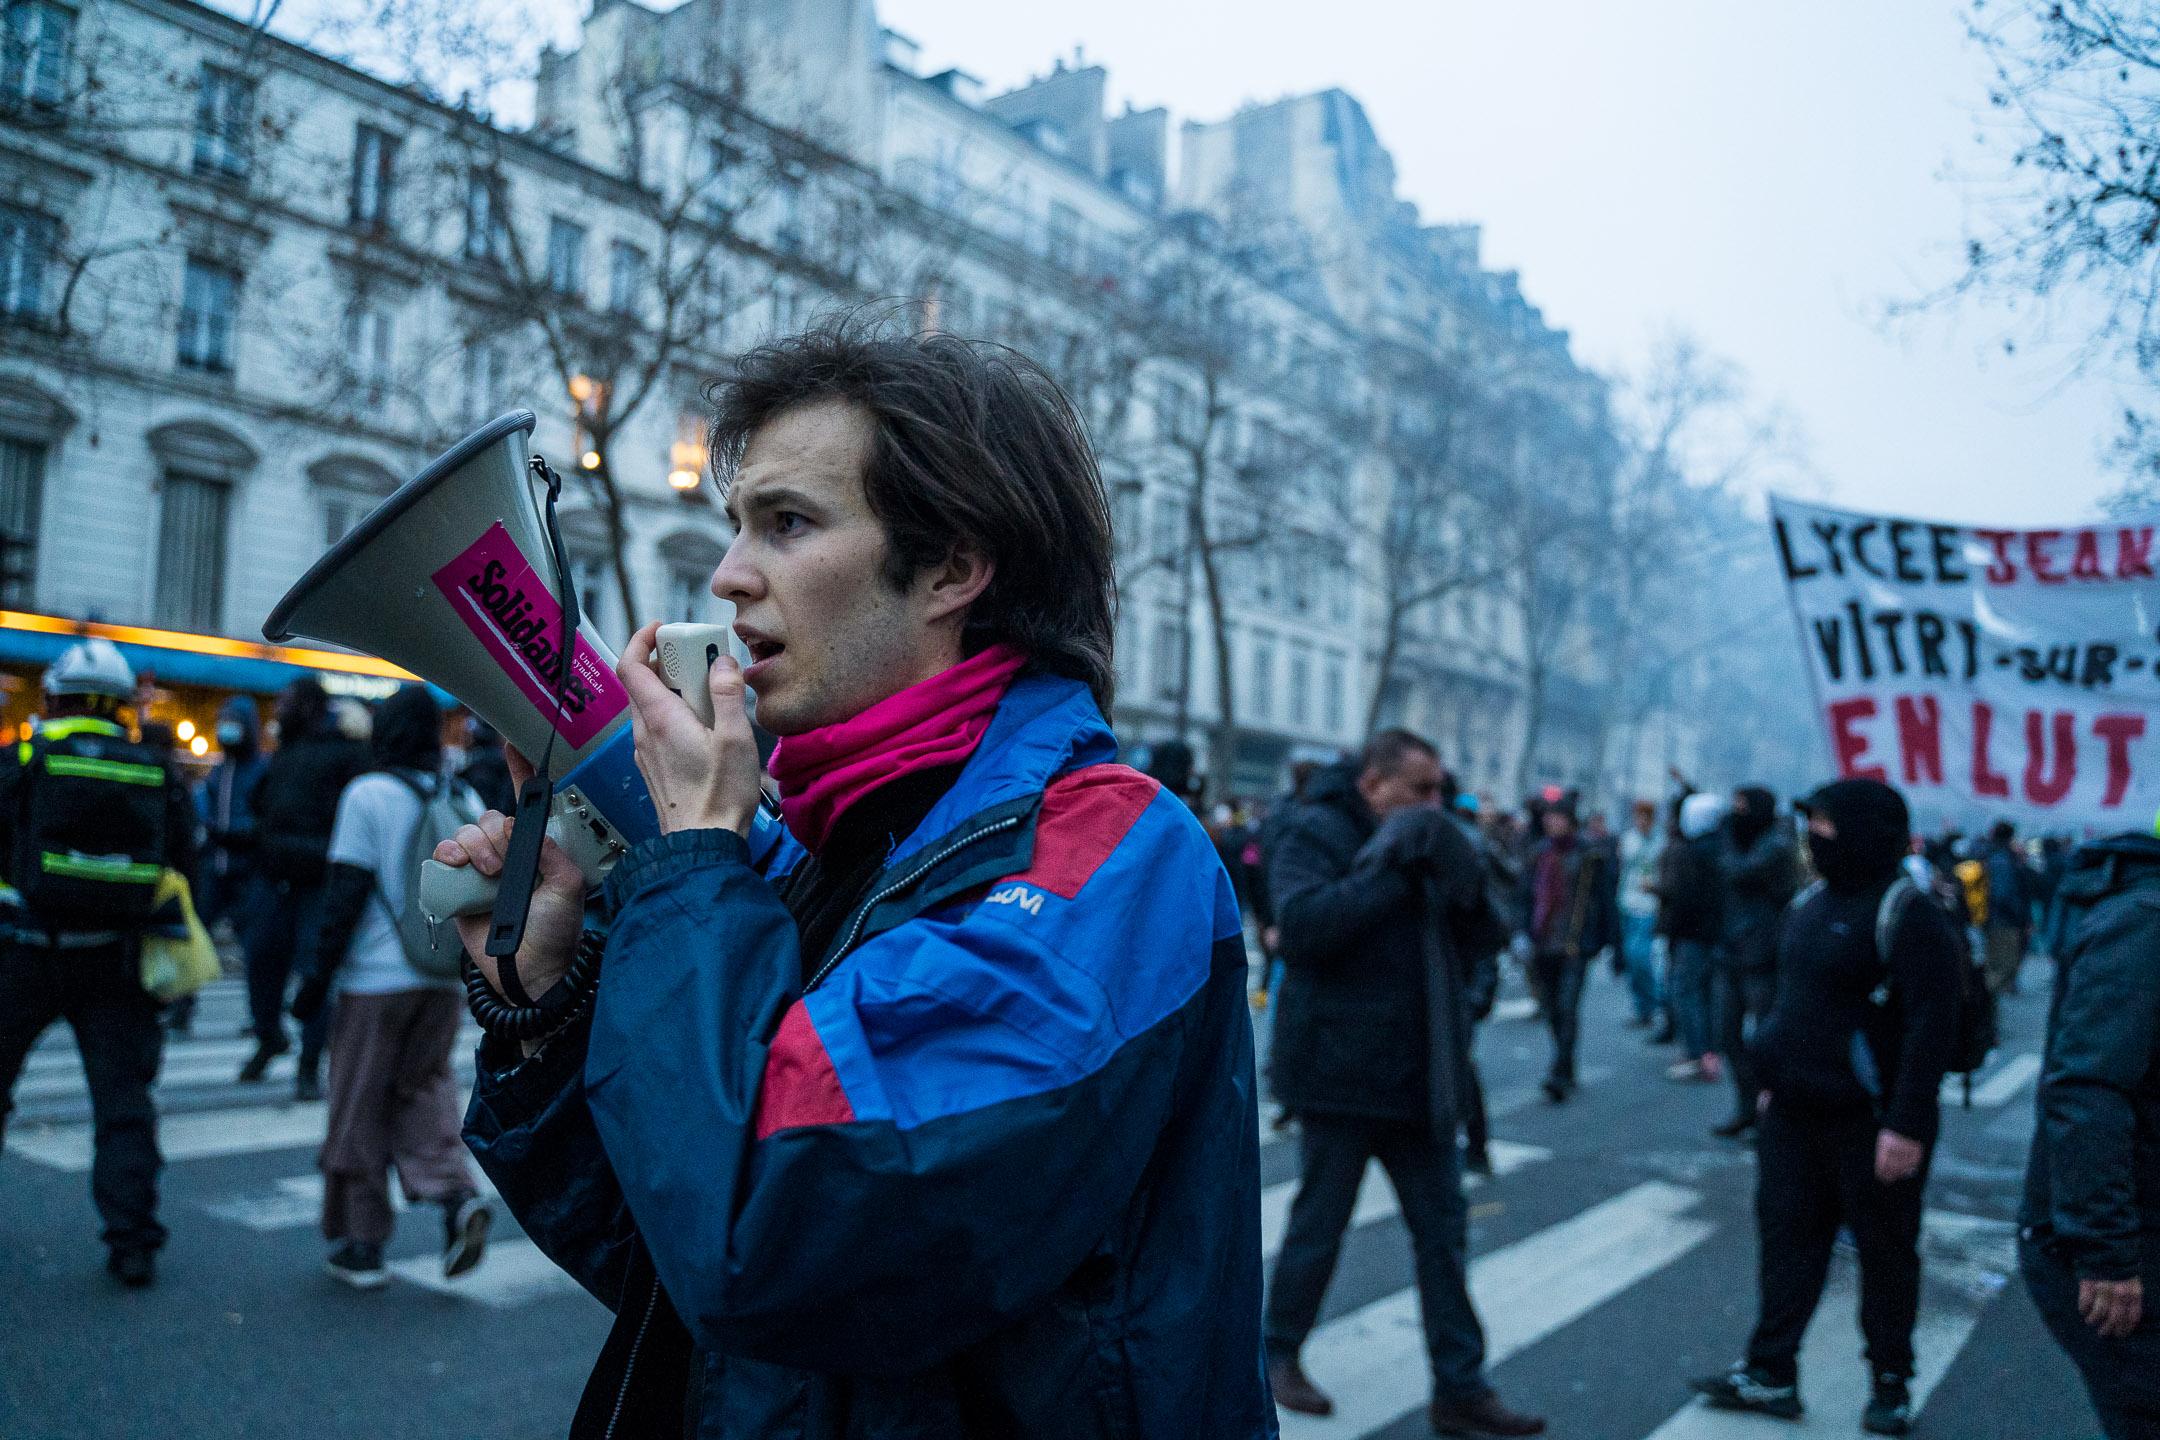 Stories : French Pension Reform Strike